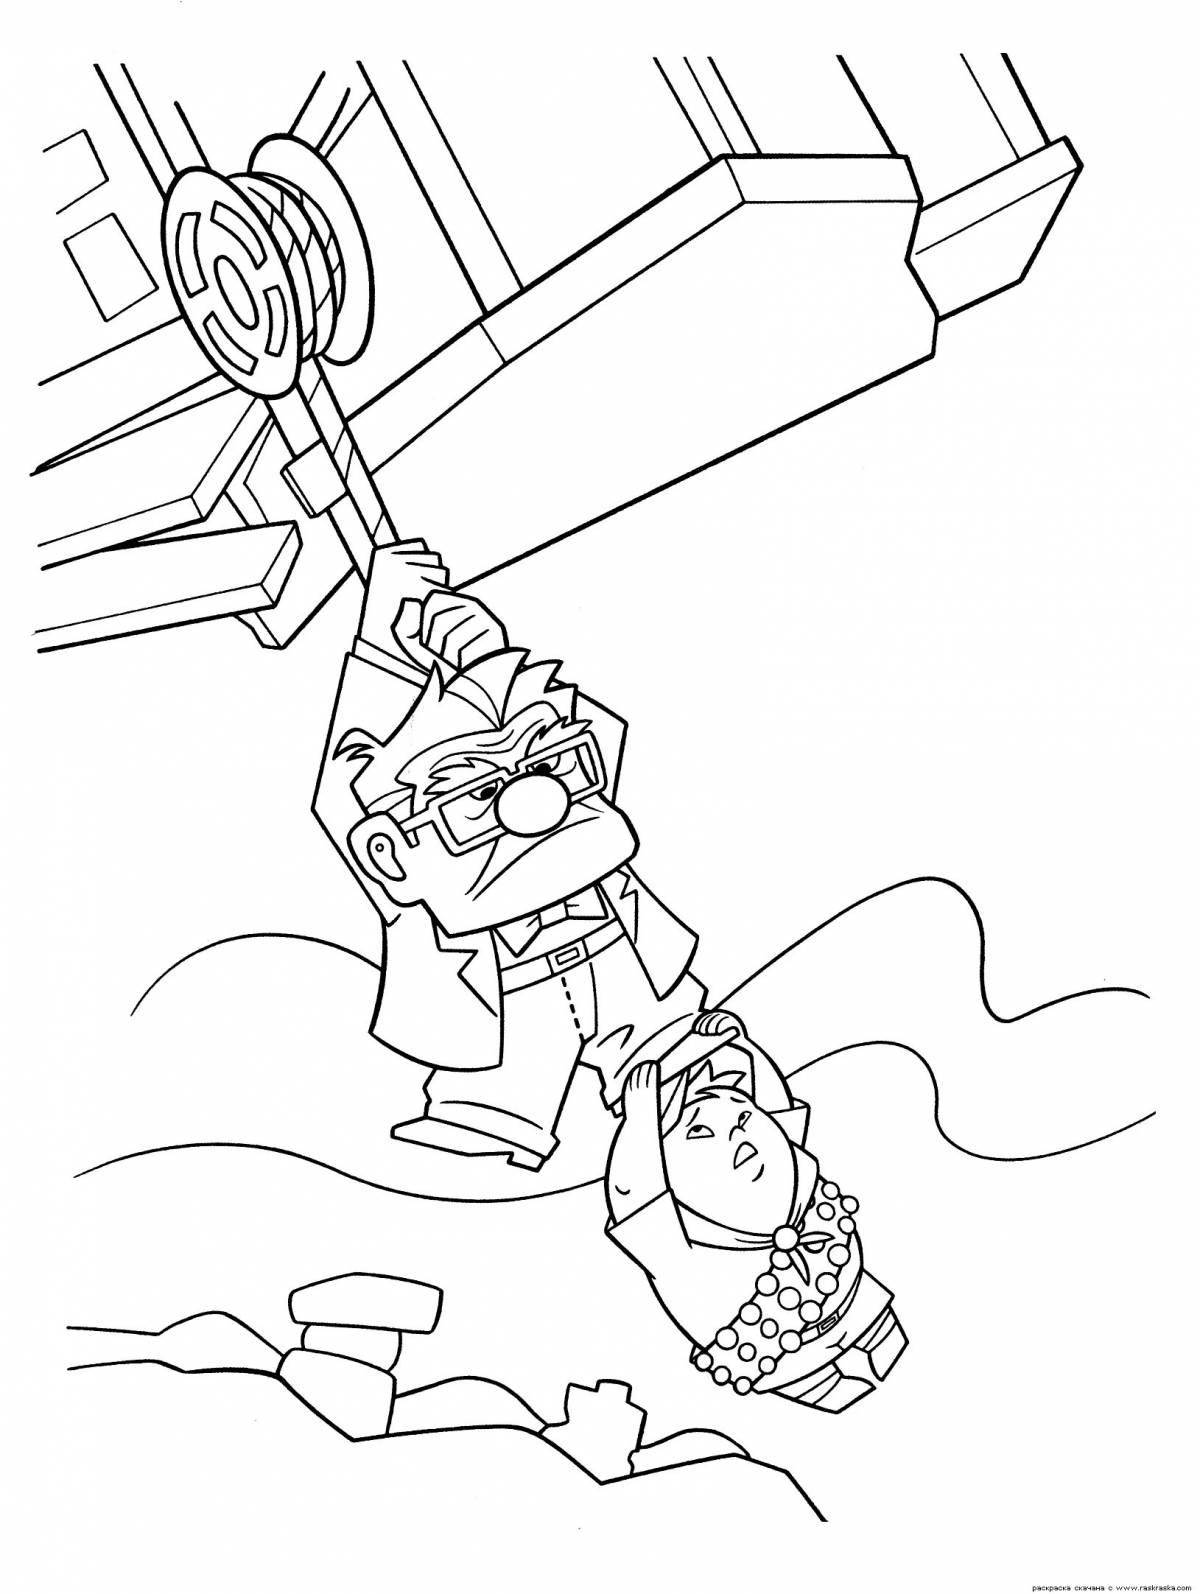 Charming coloring page up